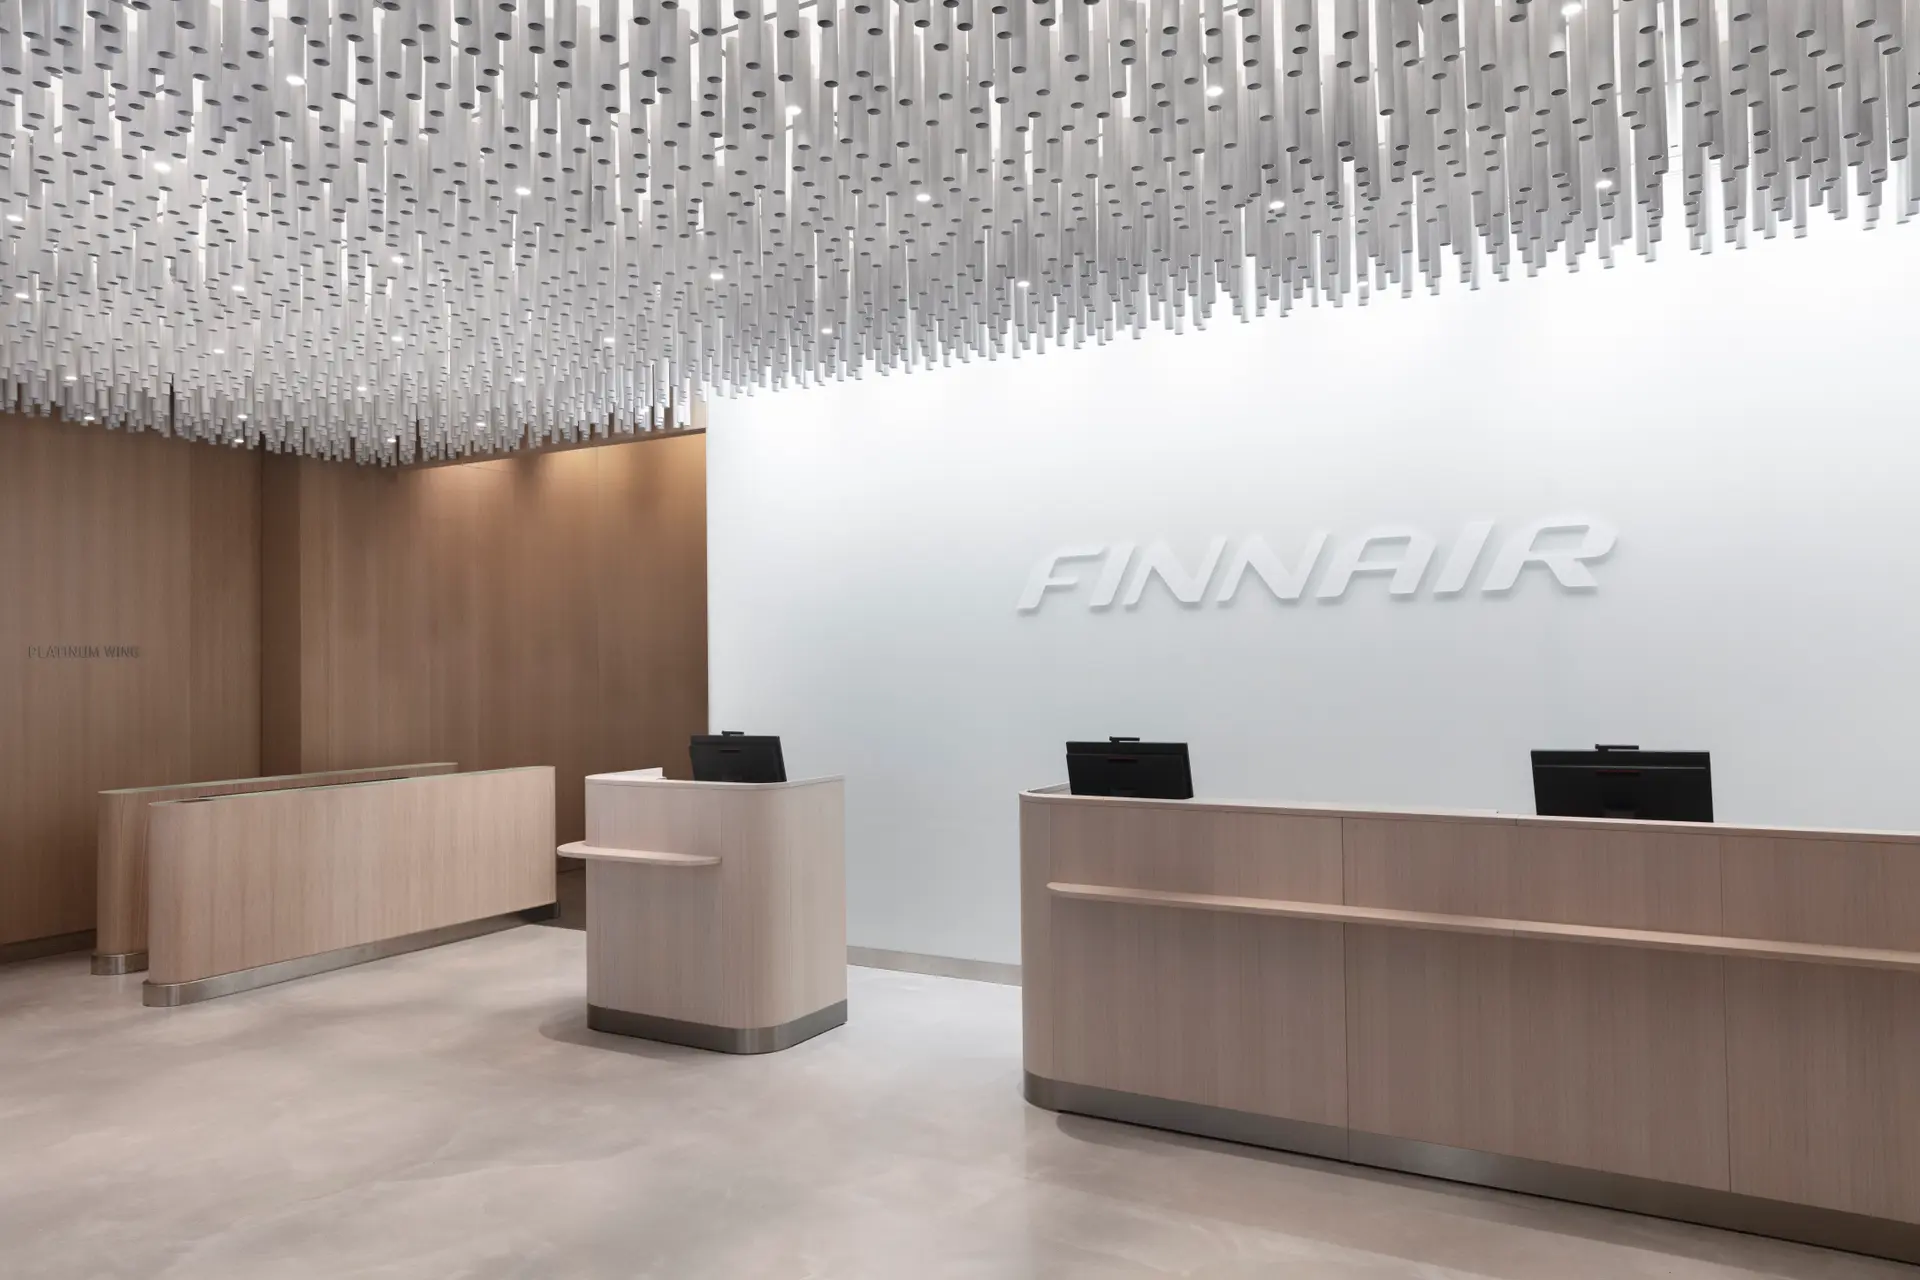 Airline review Airport experience - Finnair - 2